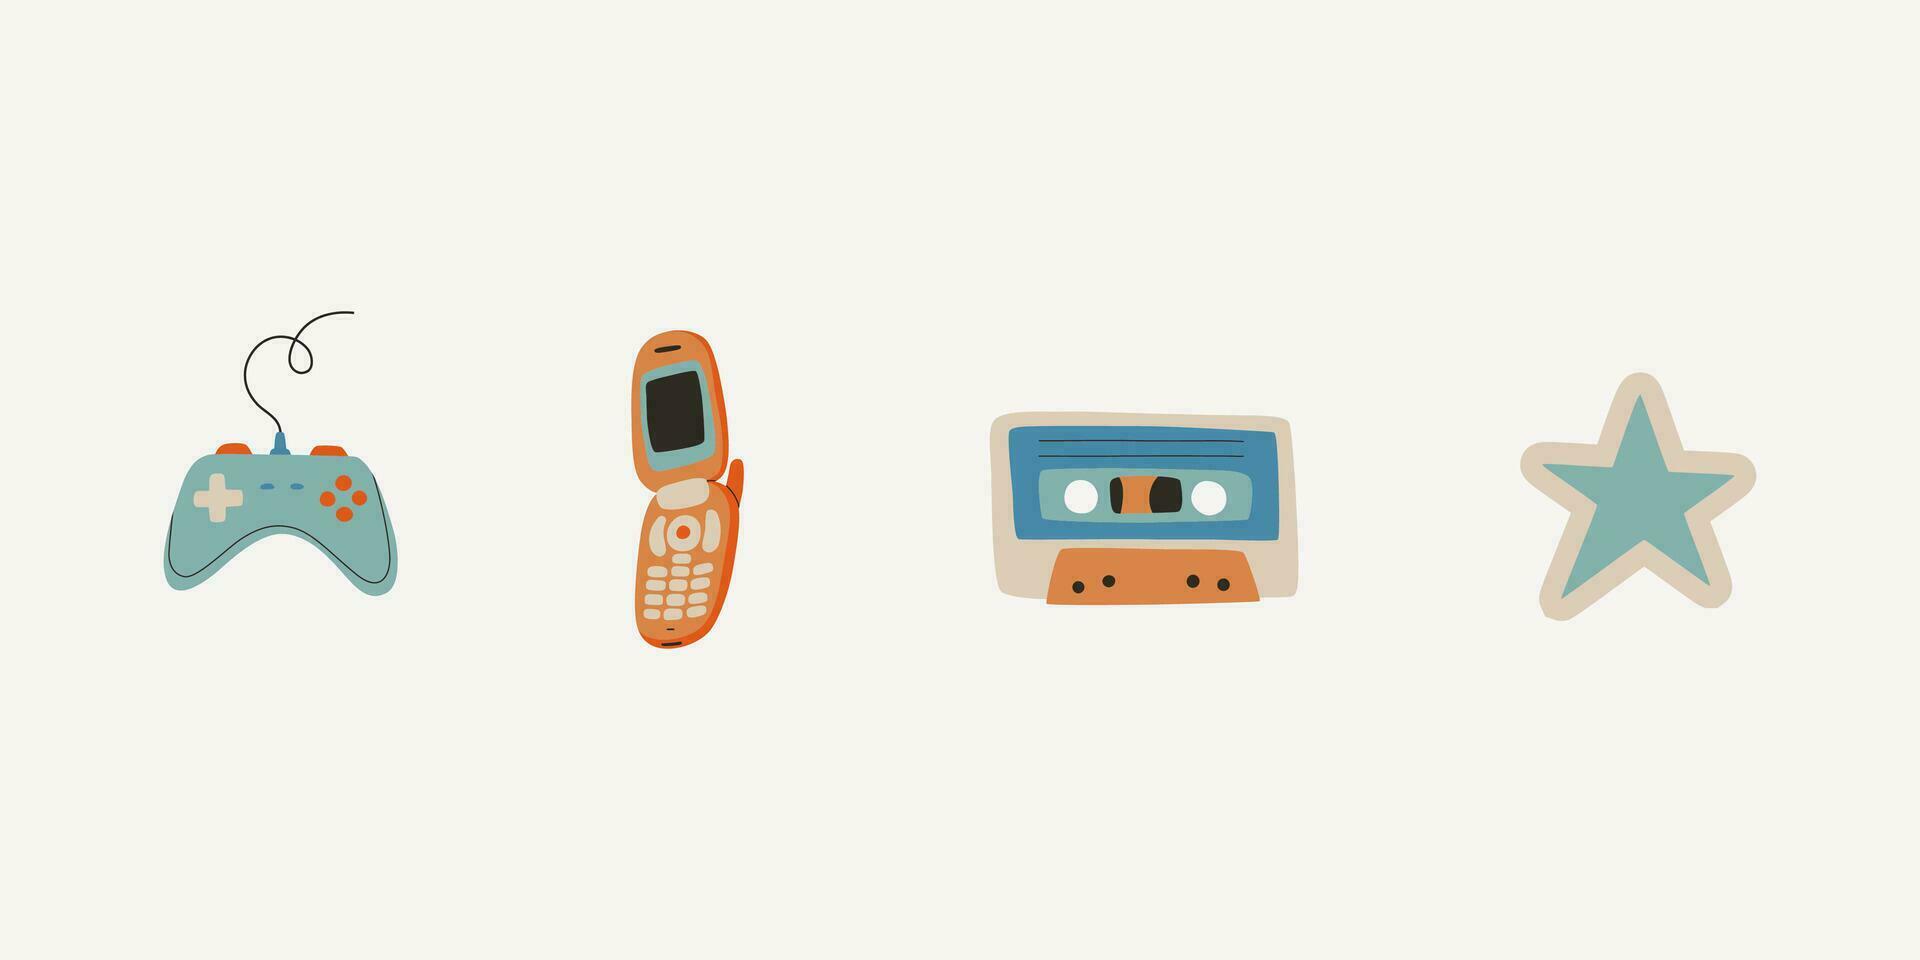 Set of retro elements from the 80s and 90s. Video game joystick, star, clamshell mobile phone, audio cassette. Vector flat trend illustration.